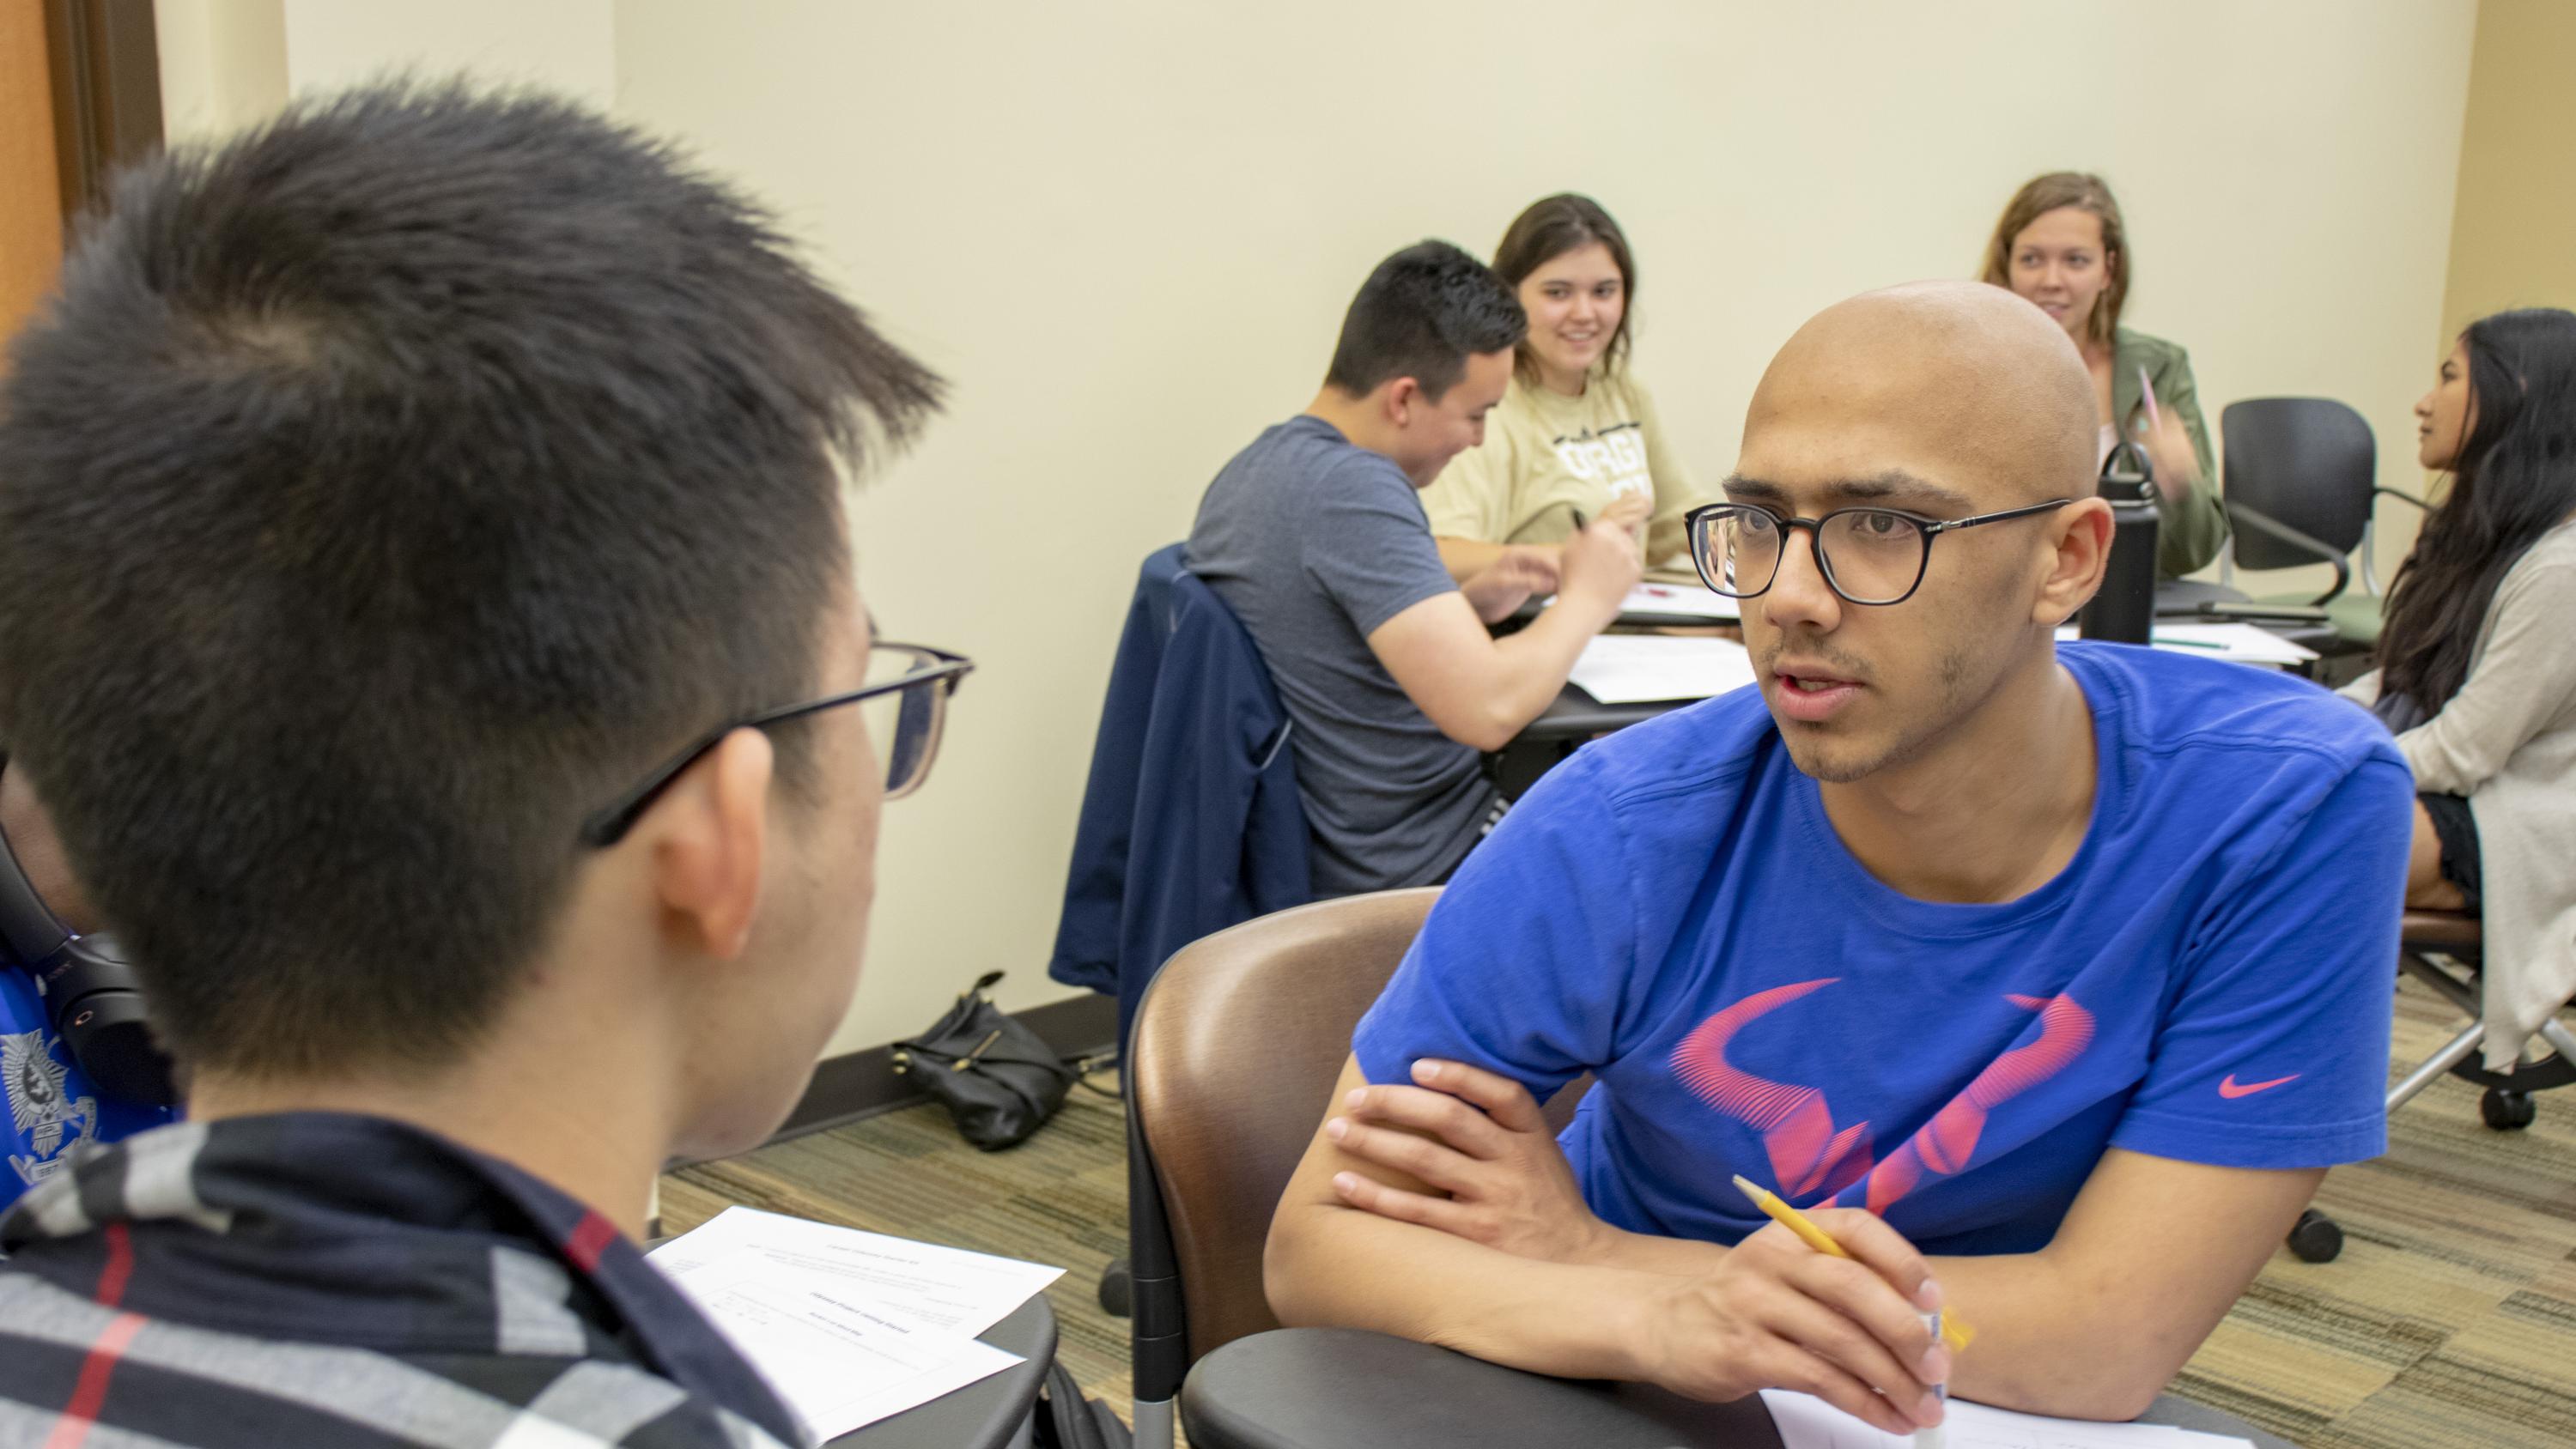 Student Jeremy Hua, left, brainstorms with Shovan Bhatia about their goals for the next 10 years during the April 17, 2019 session of Career Design for Global Citizenship. In the background, students Ian Bunker, Jaynie Rice, Caitlyn Beals, and Sabirah Haque discuss their final project, in which students design several alternative life paths.